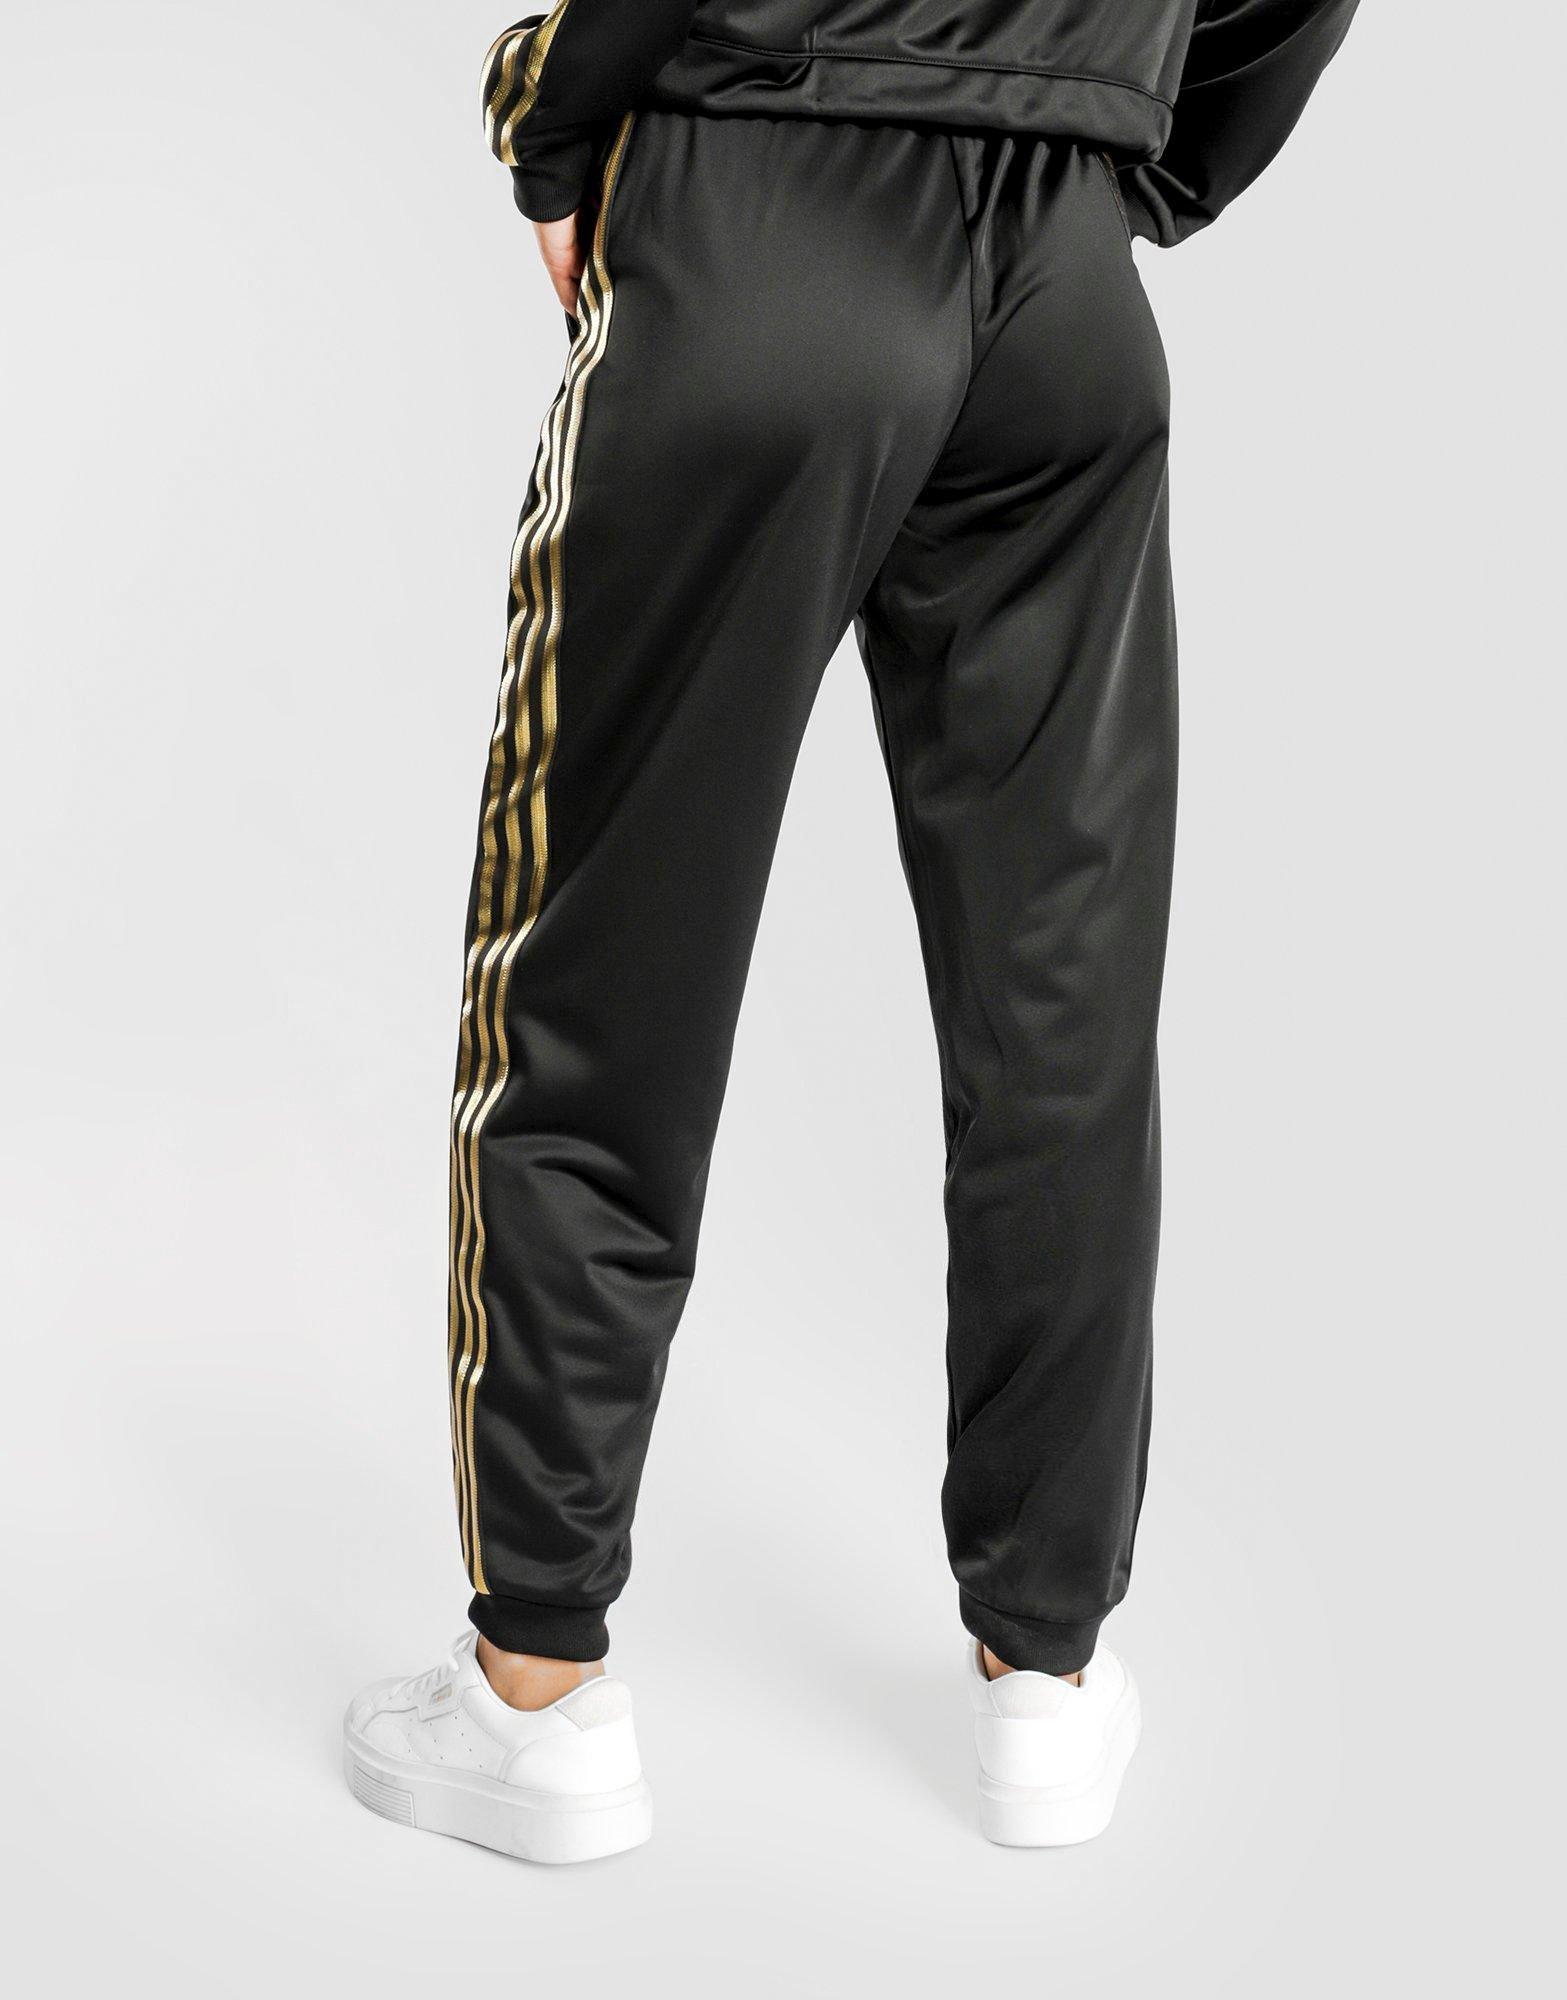 adidas sst outfit